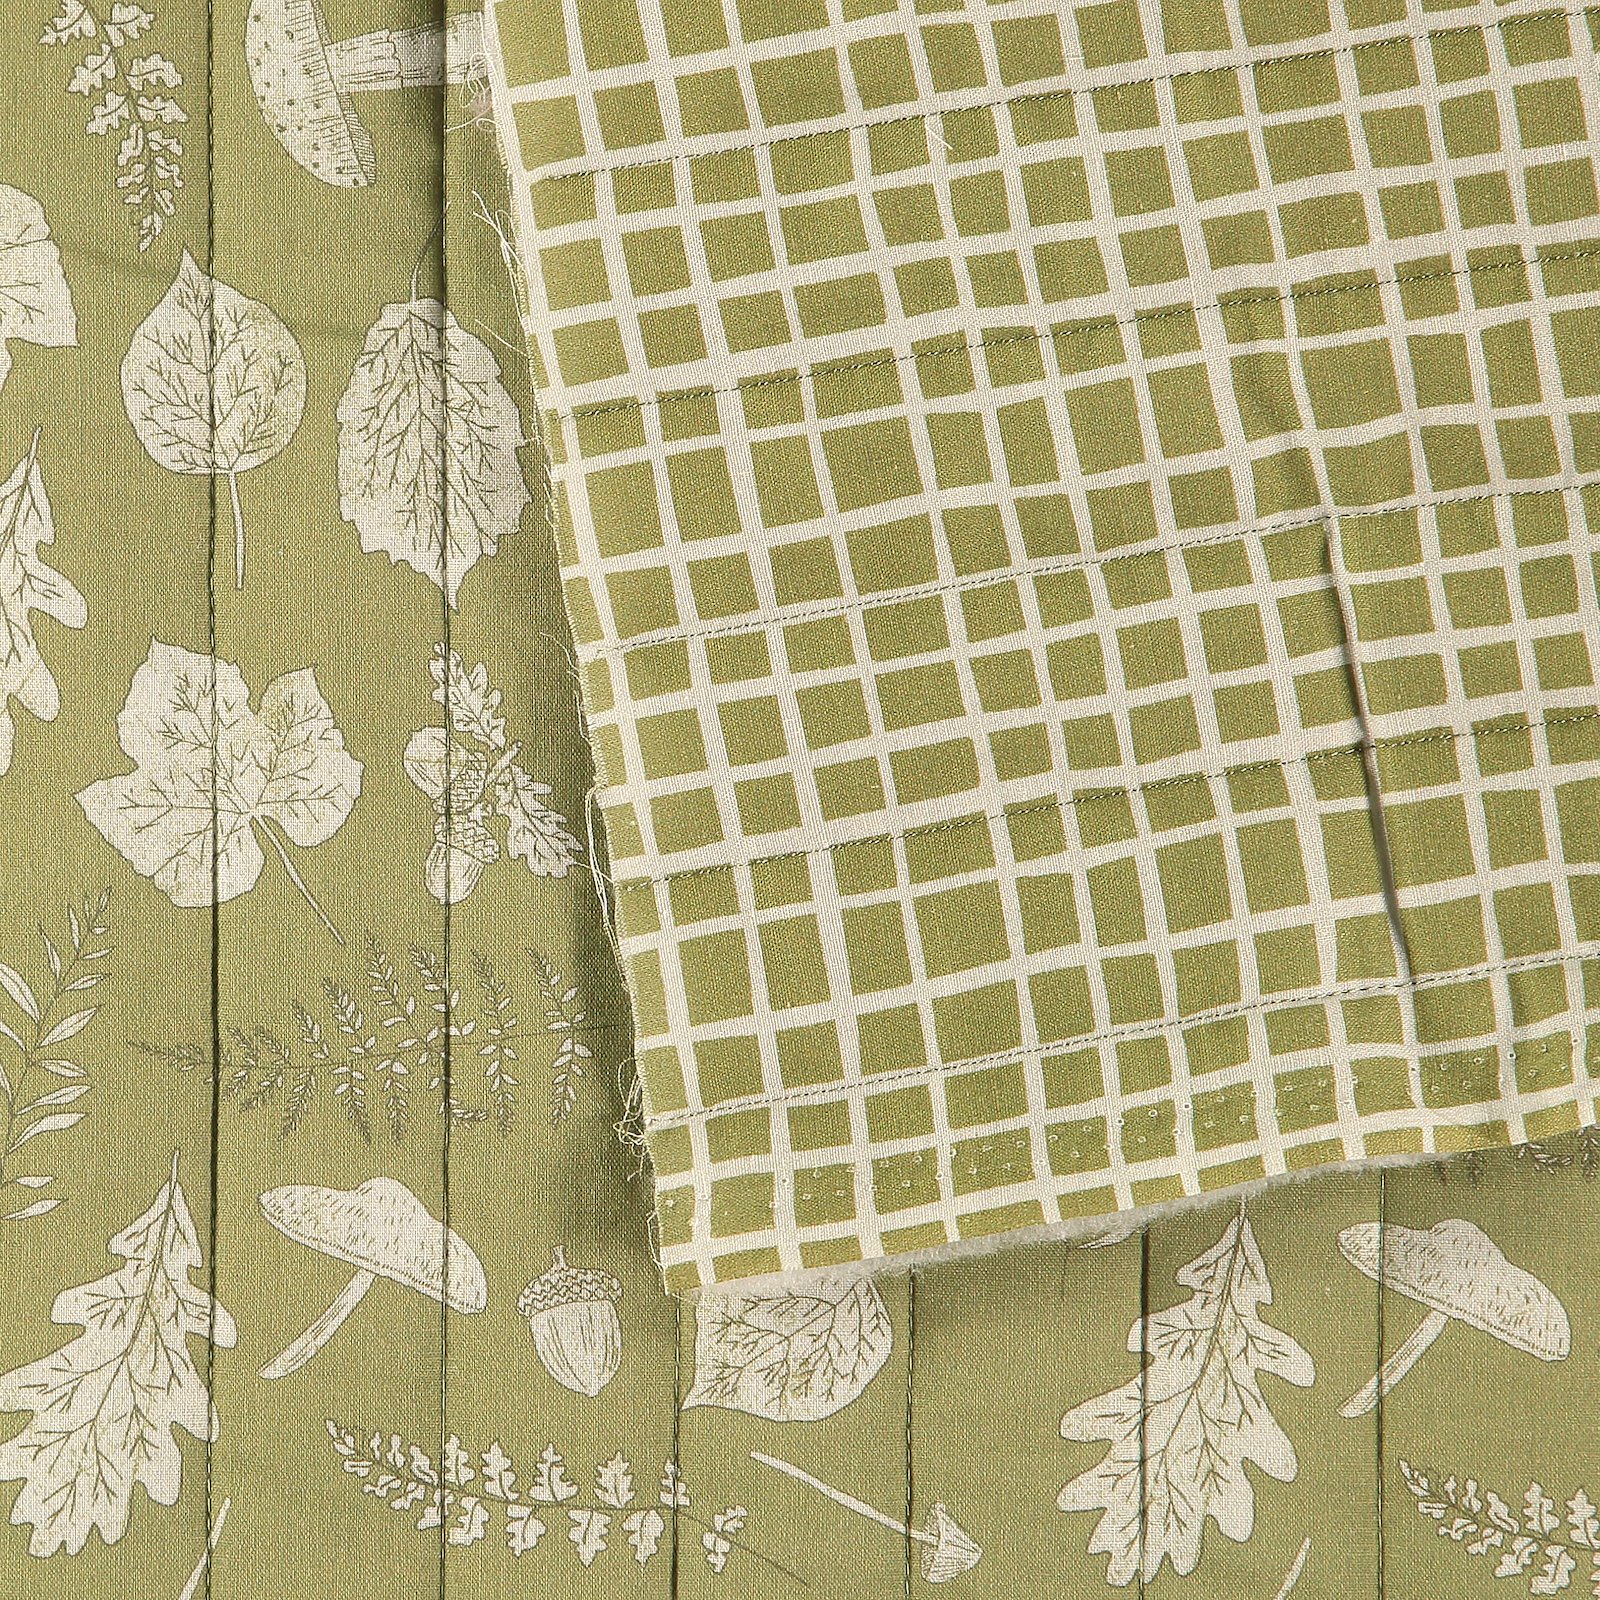 Woven quilt olive green w leafs 2-sided 920258_pack_b